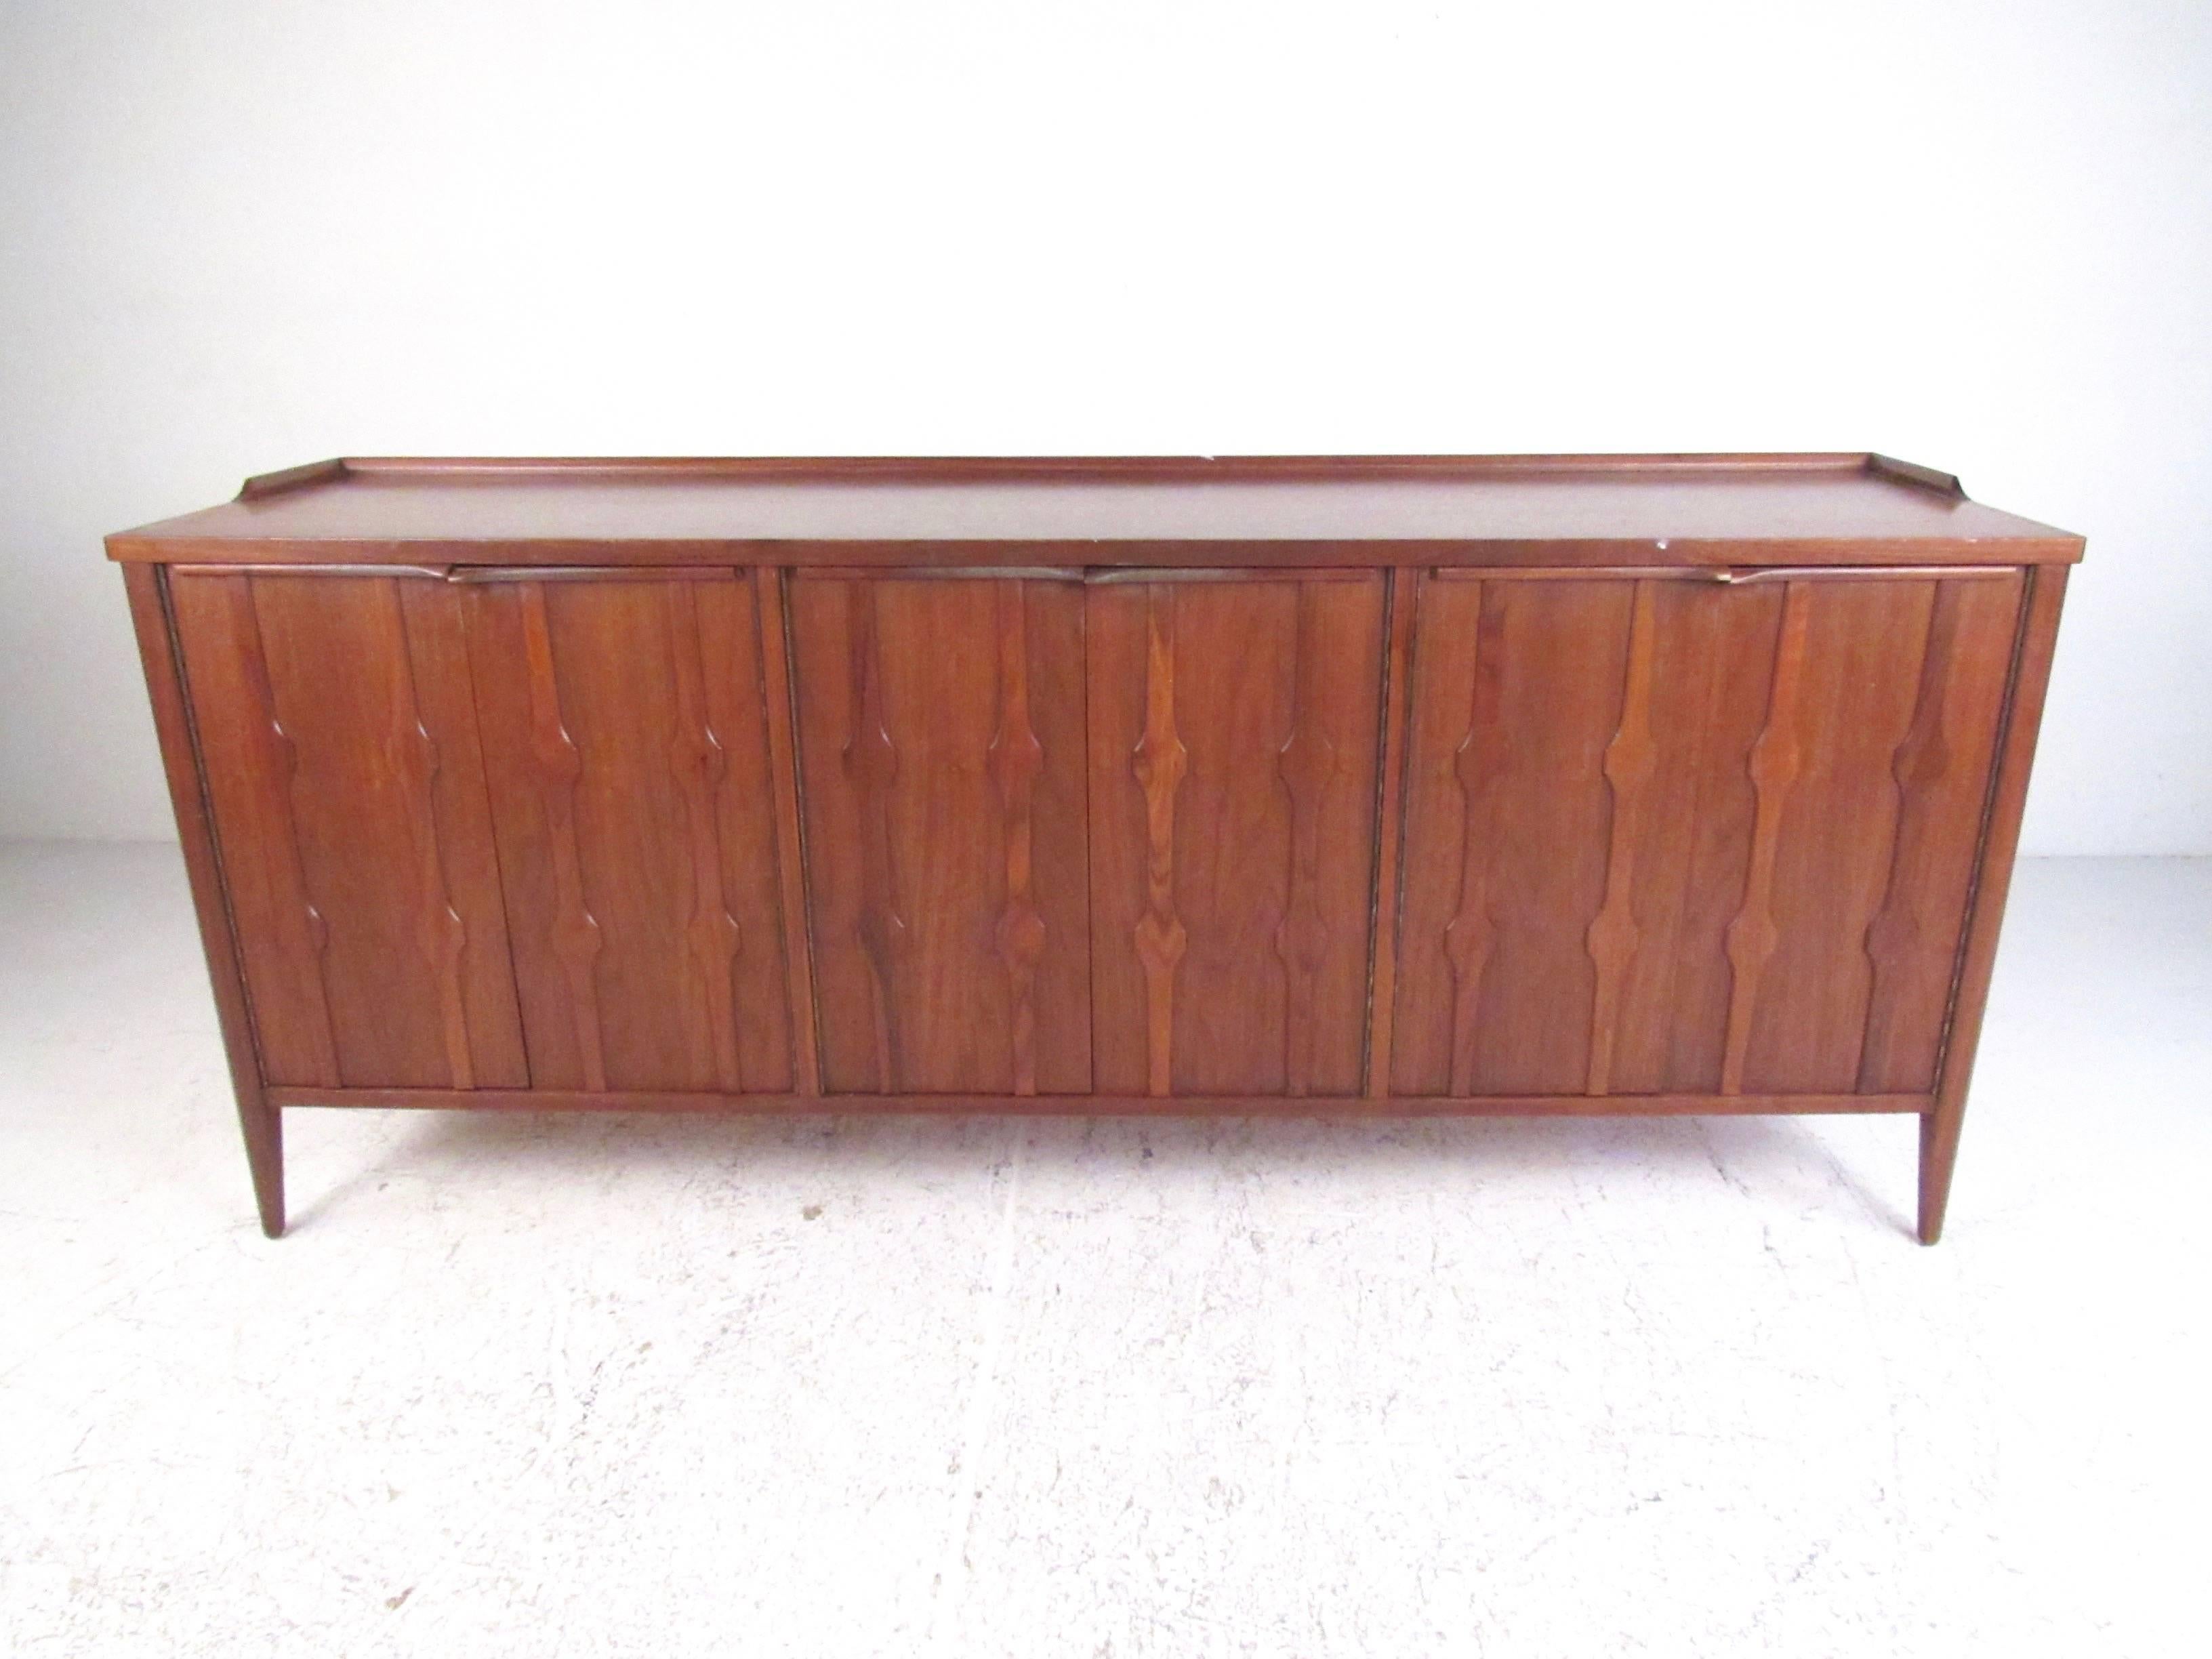 This vintage American sideboard features rich walnut finish, spacious interior cabinets, and stylish decorated cabinet doors. Raised edges and cared wood pulls combine with plenty of shelf and drawer space make this the perfect piece for dining room